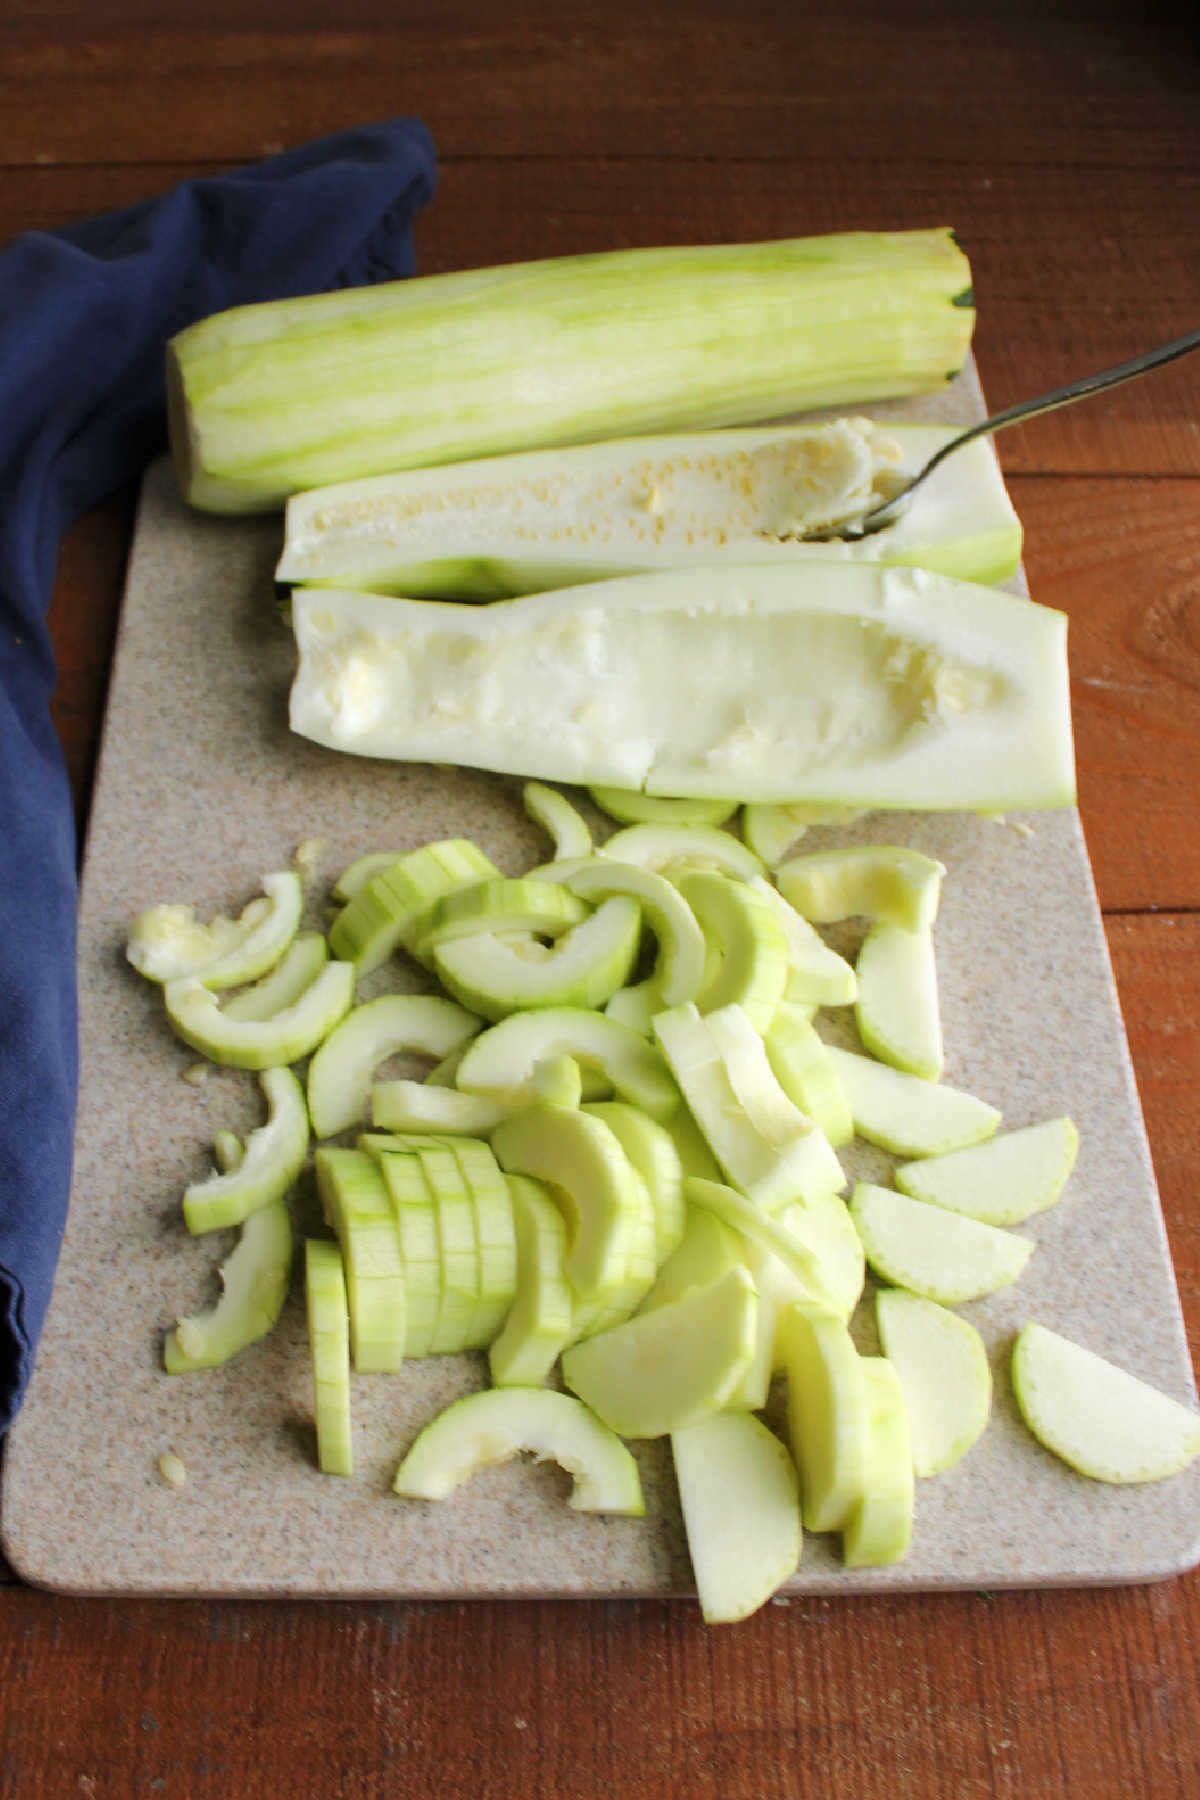 Preparing zucchini for the pie by removing the skin and seeds and slicing thinly.